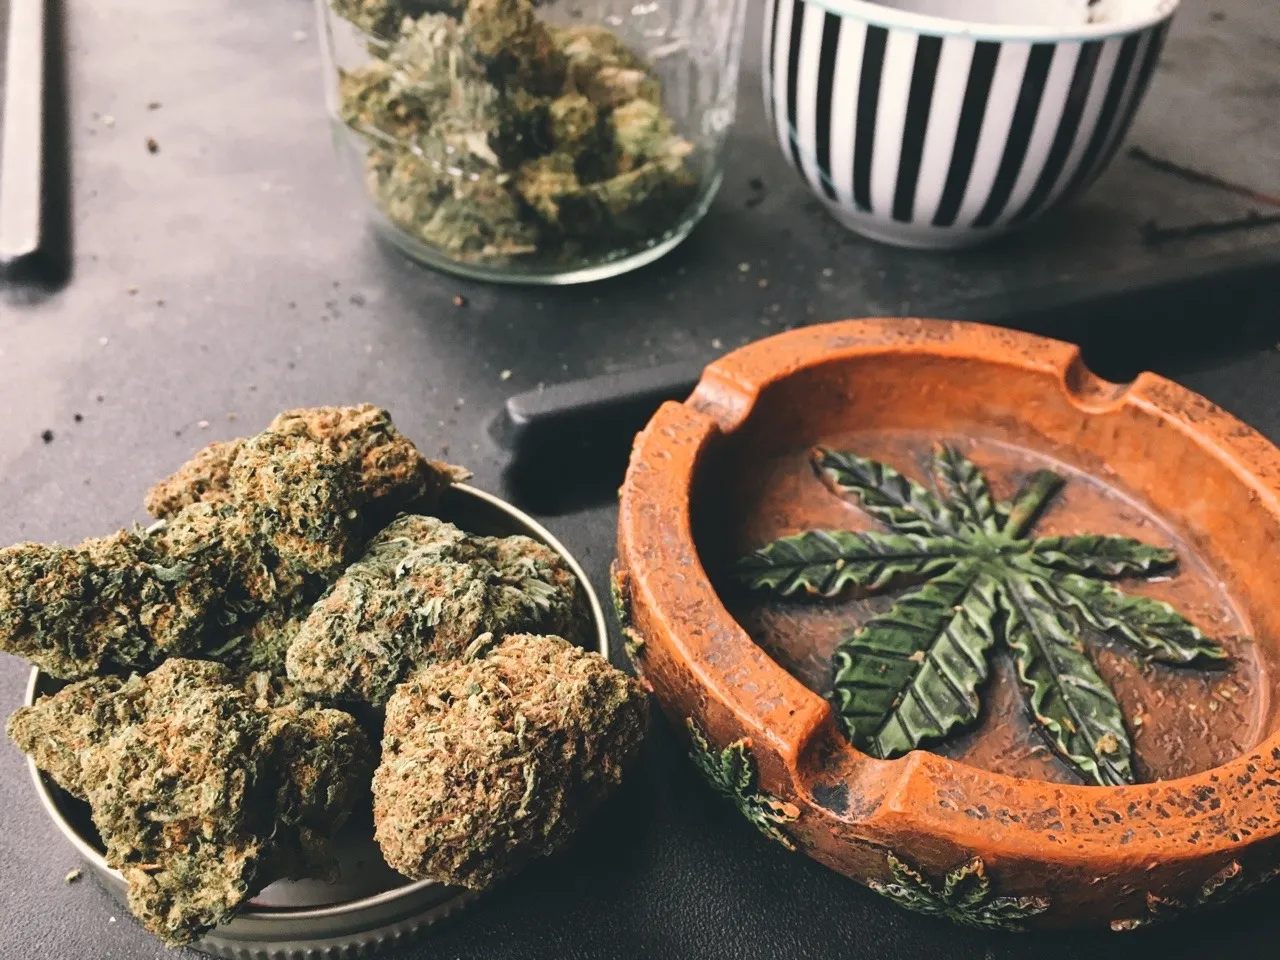 Removing parasites with cannabis: is it real? In this article, you can learn about the most unexpected and beneficial effects of weed!